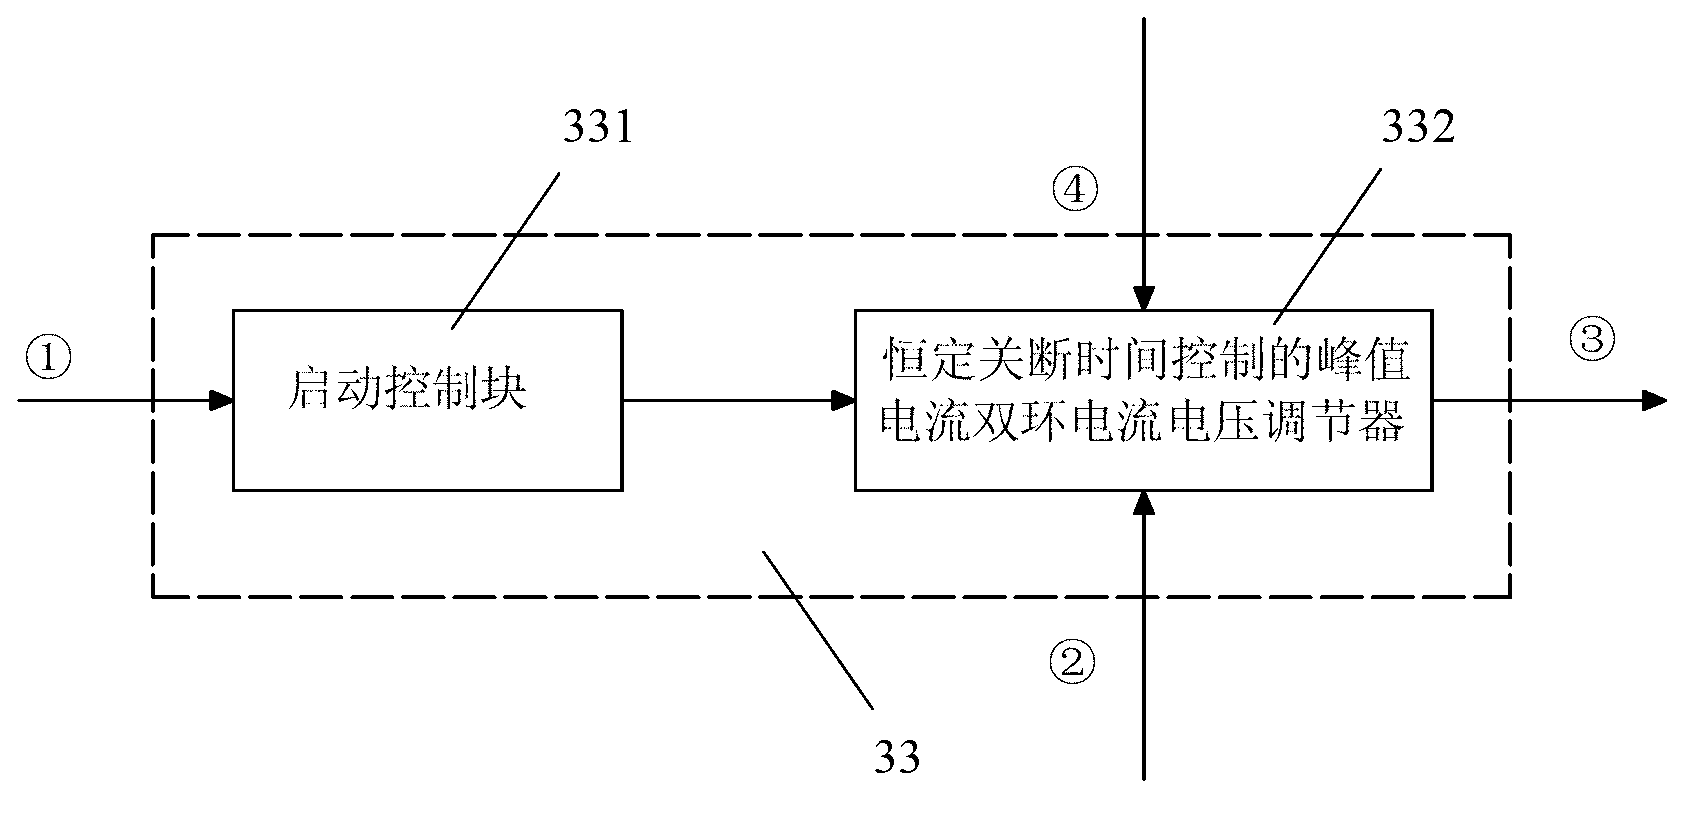 High-power-factor direct-current current output light-emitting diode (LED) driving circuit with low-energy-storage capacitor